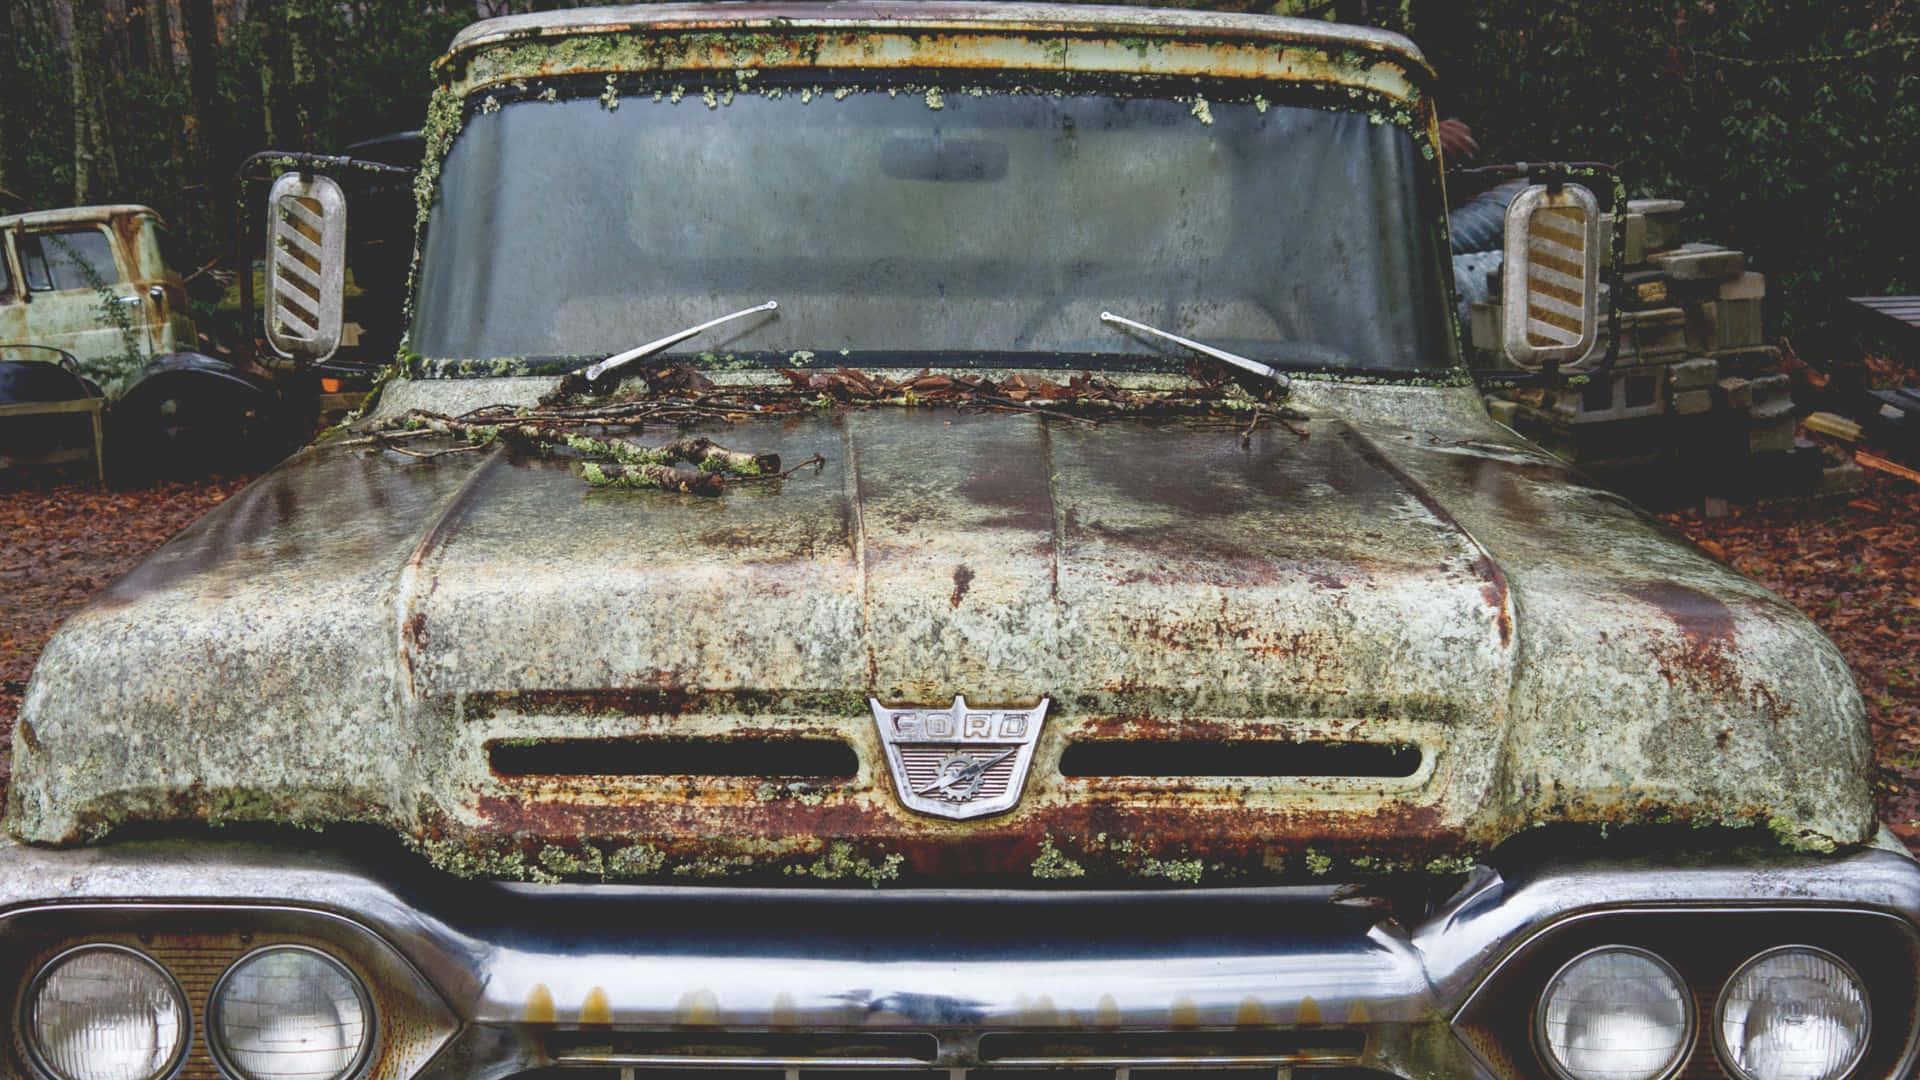 A Rusty Truck Parked In The Woods